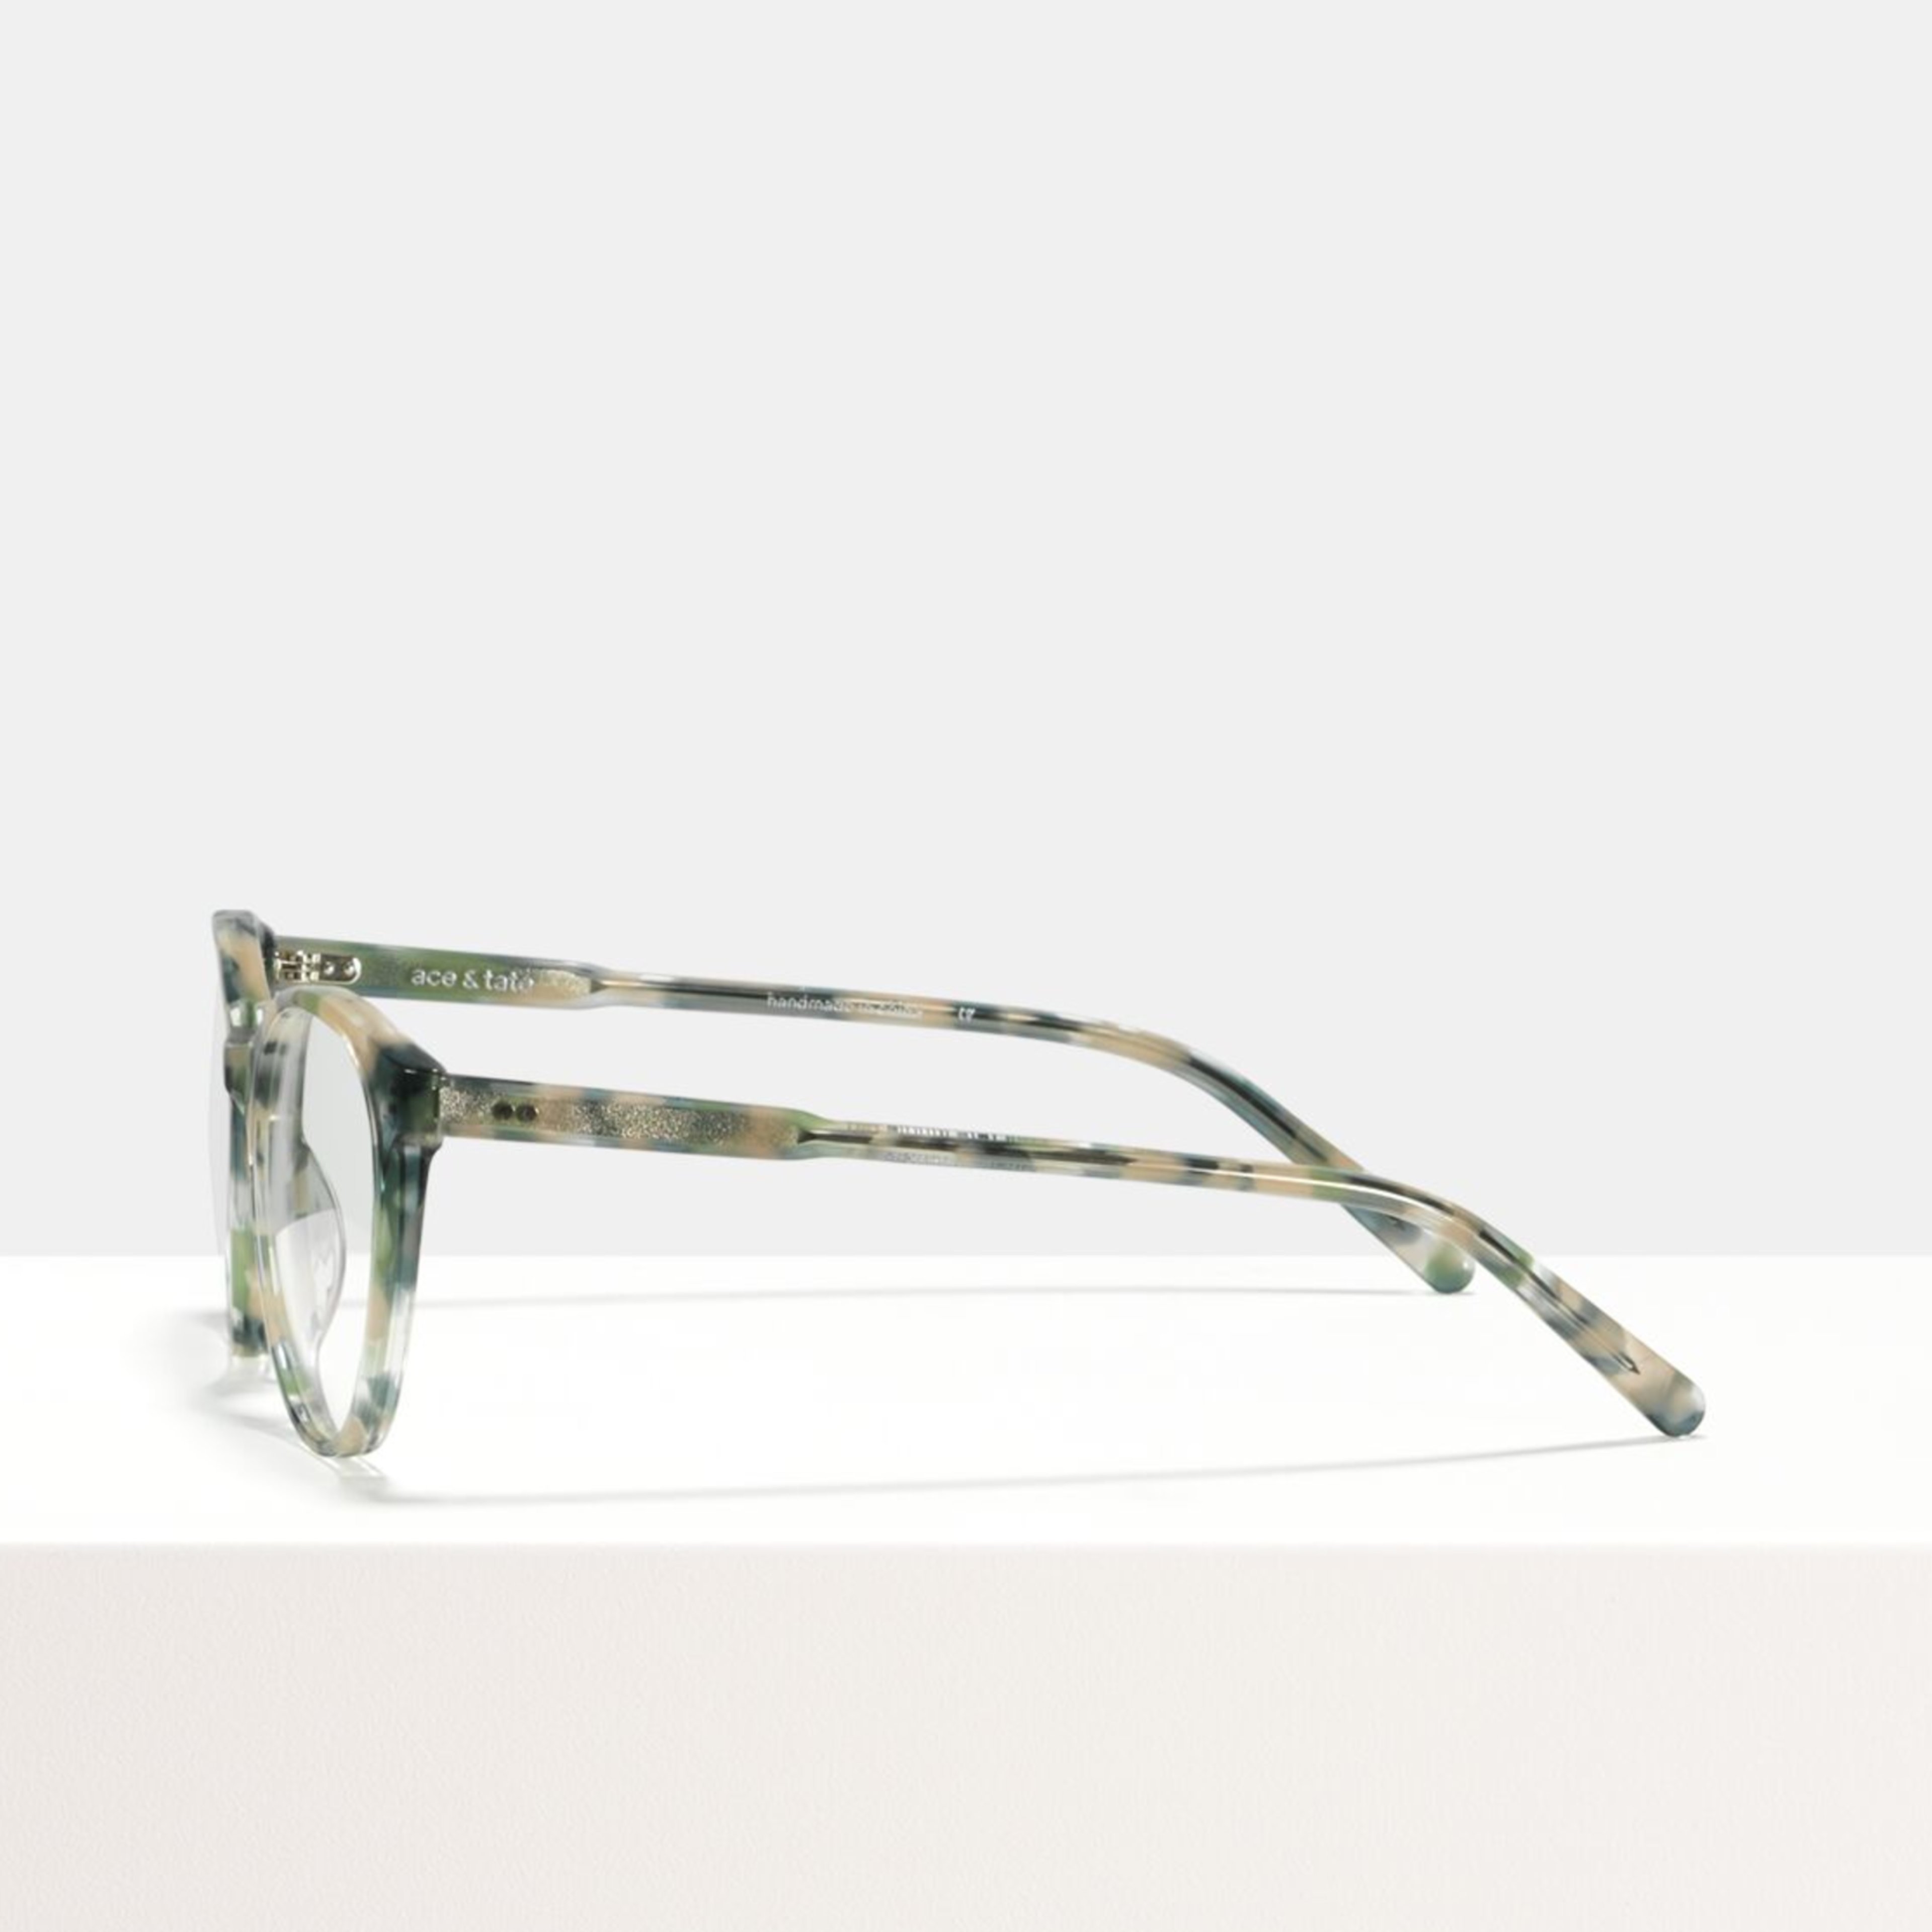 Ace & Tate Glasses | round acetate in Beige, Blue, Green, Grey